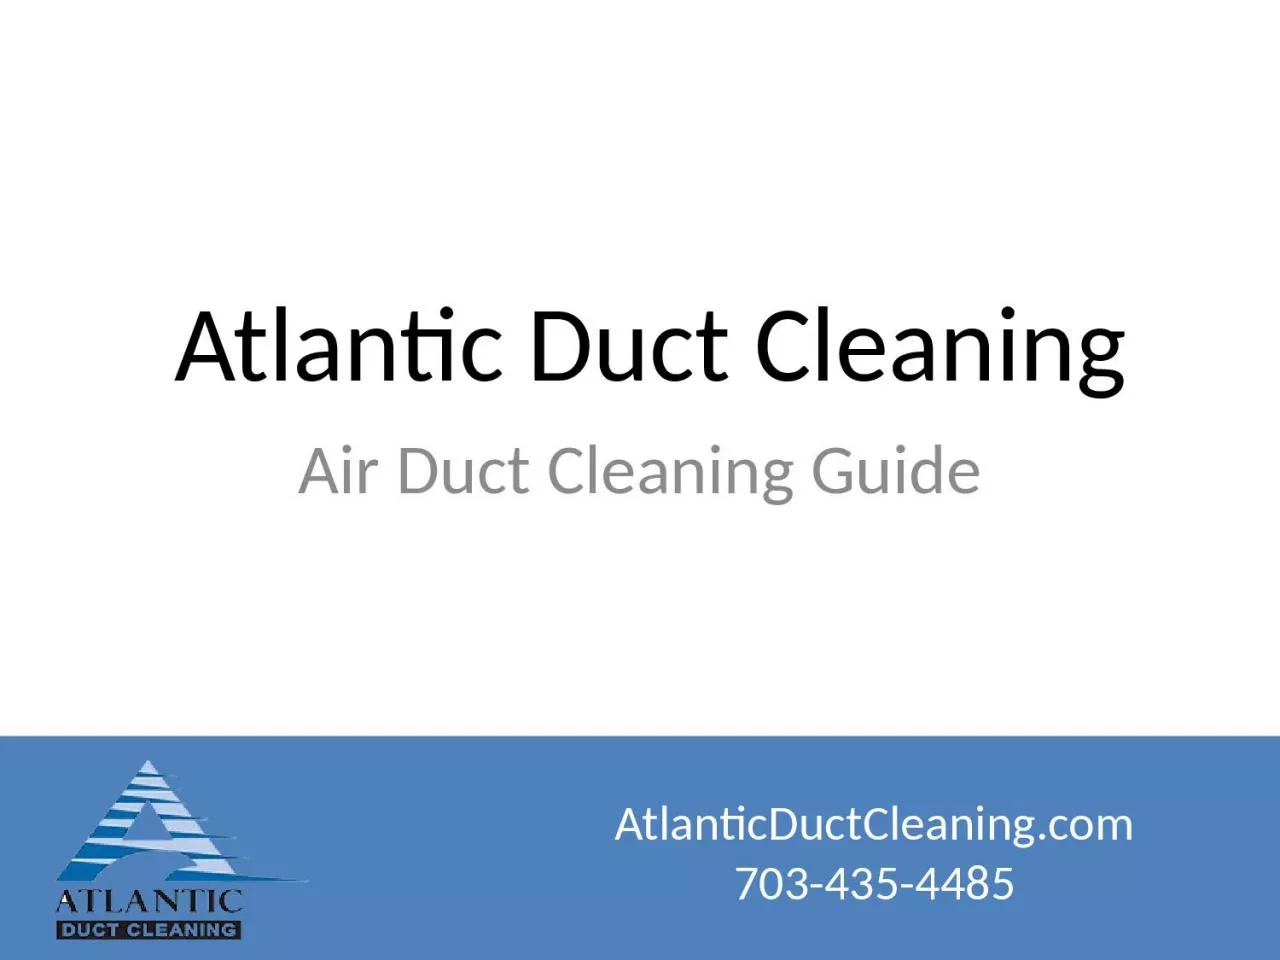 Atlantic Duct Cleaning Air Duct Cleaning Guide